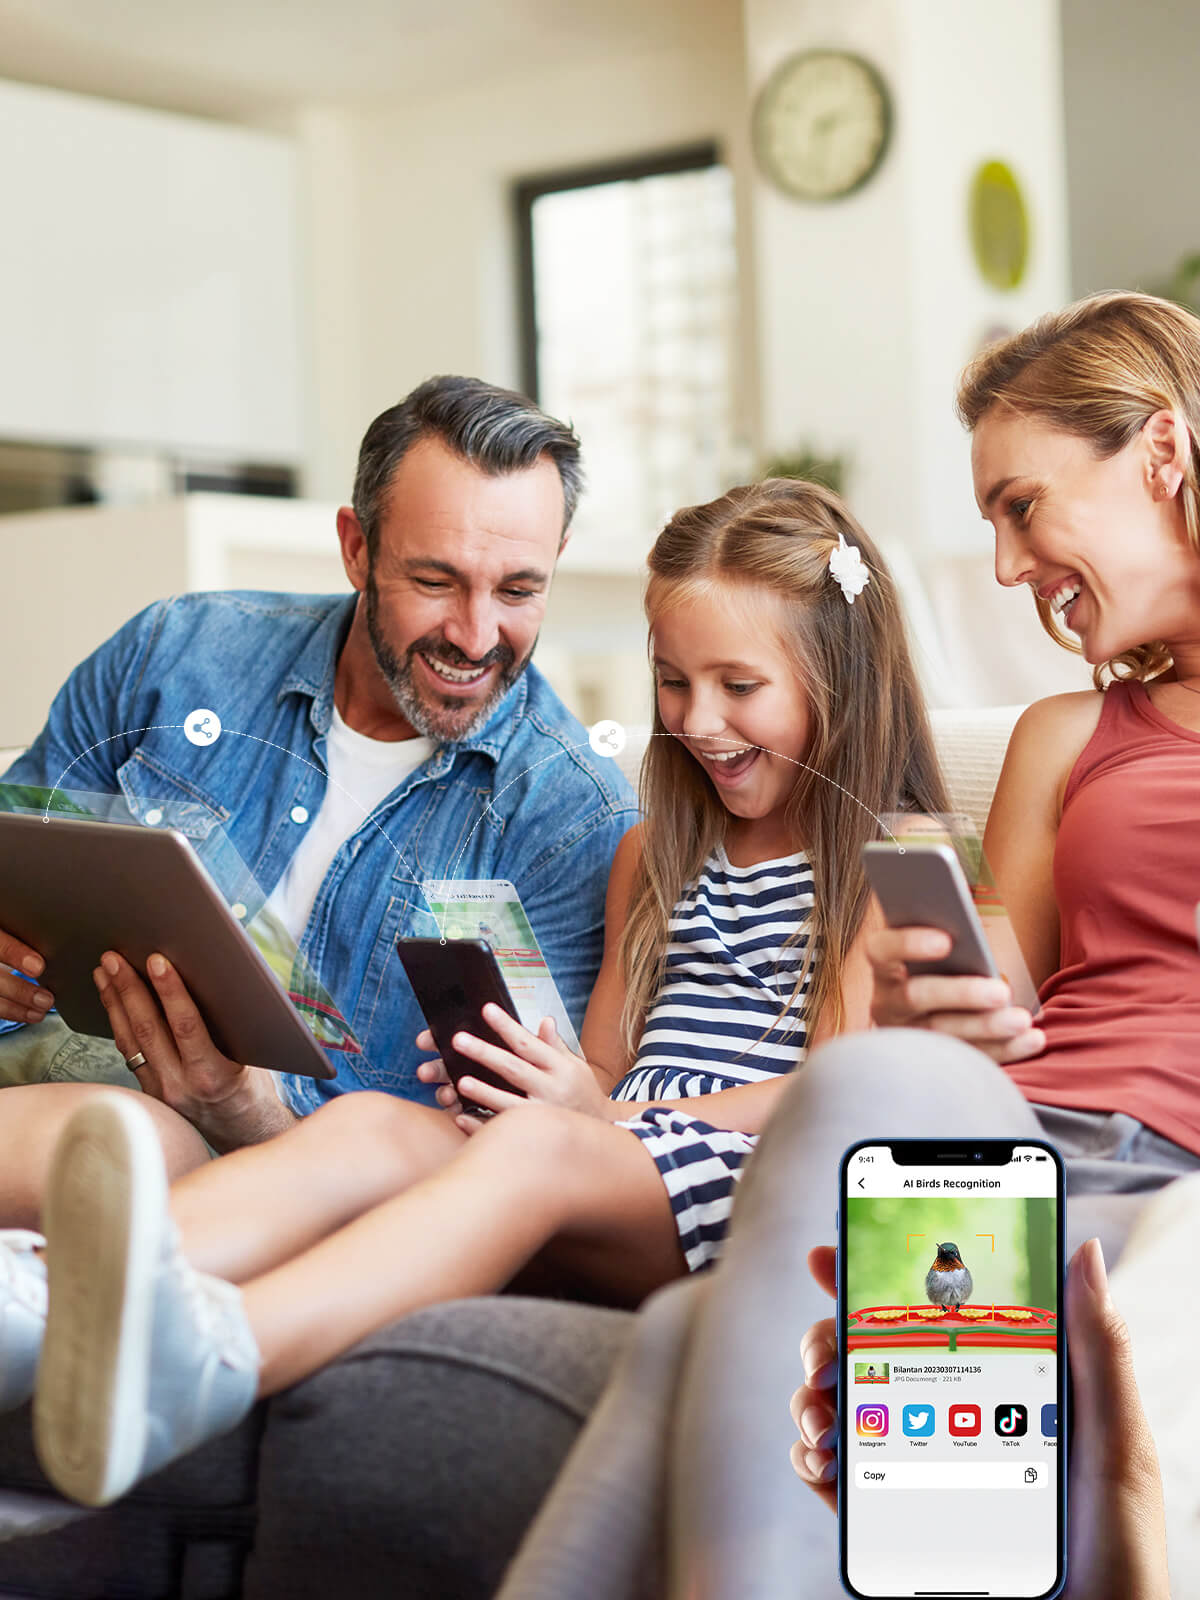 Feel free to share the device with your family for multi-person multi-device sharing and share adorable bird videos on social media platforms like Instagram anytime. A happy-go-lucky family is having fun with multiplayer multi-device sharing and enjoying cute bird videos!